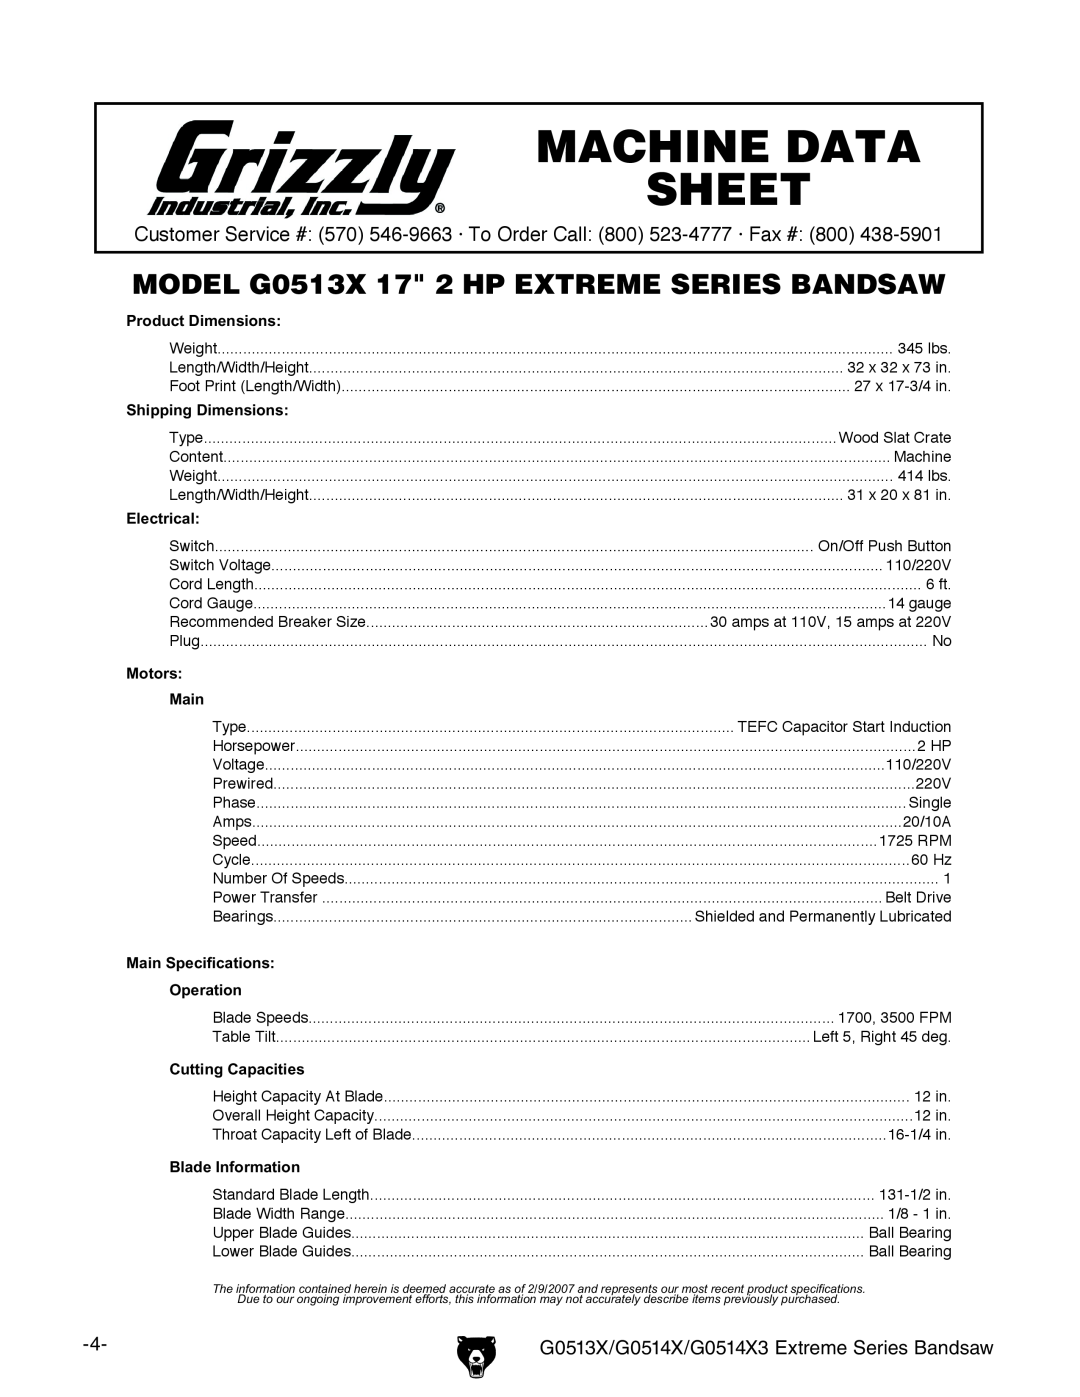 Grizzly G0514X G0513X Machine Data Sheet, MODEL G0513X 17 2 HP EXTREME SERIES BANDSAW, Product Dimensions, Electrical 